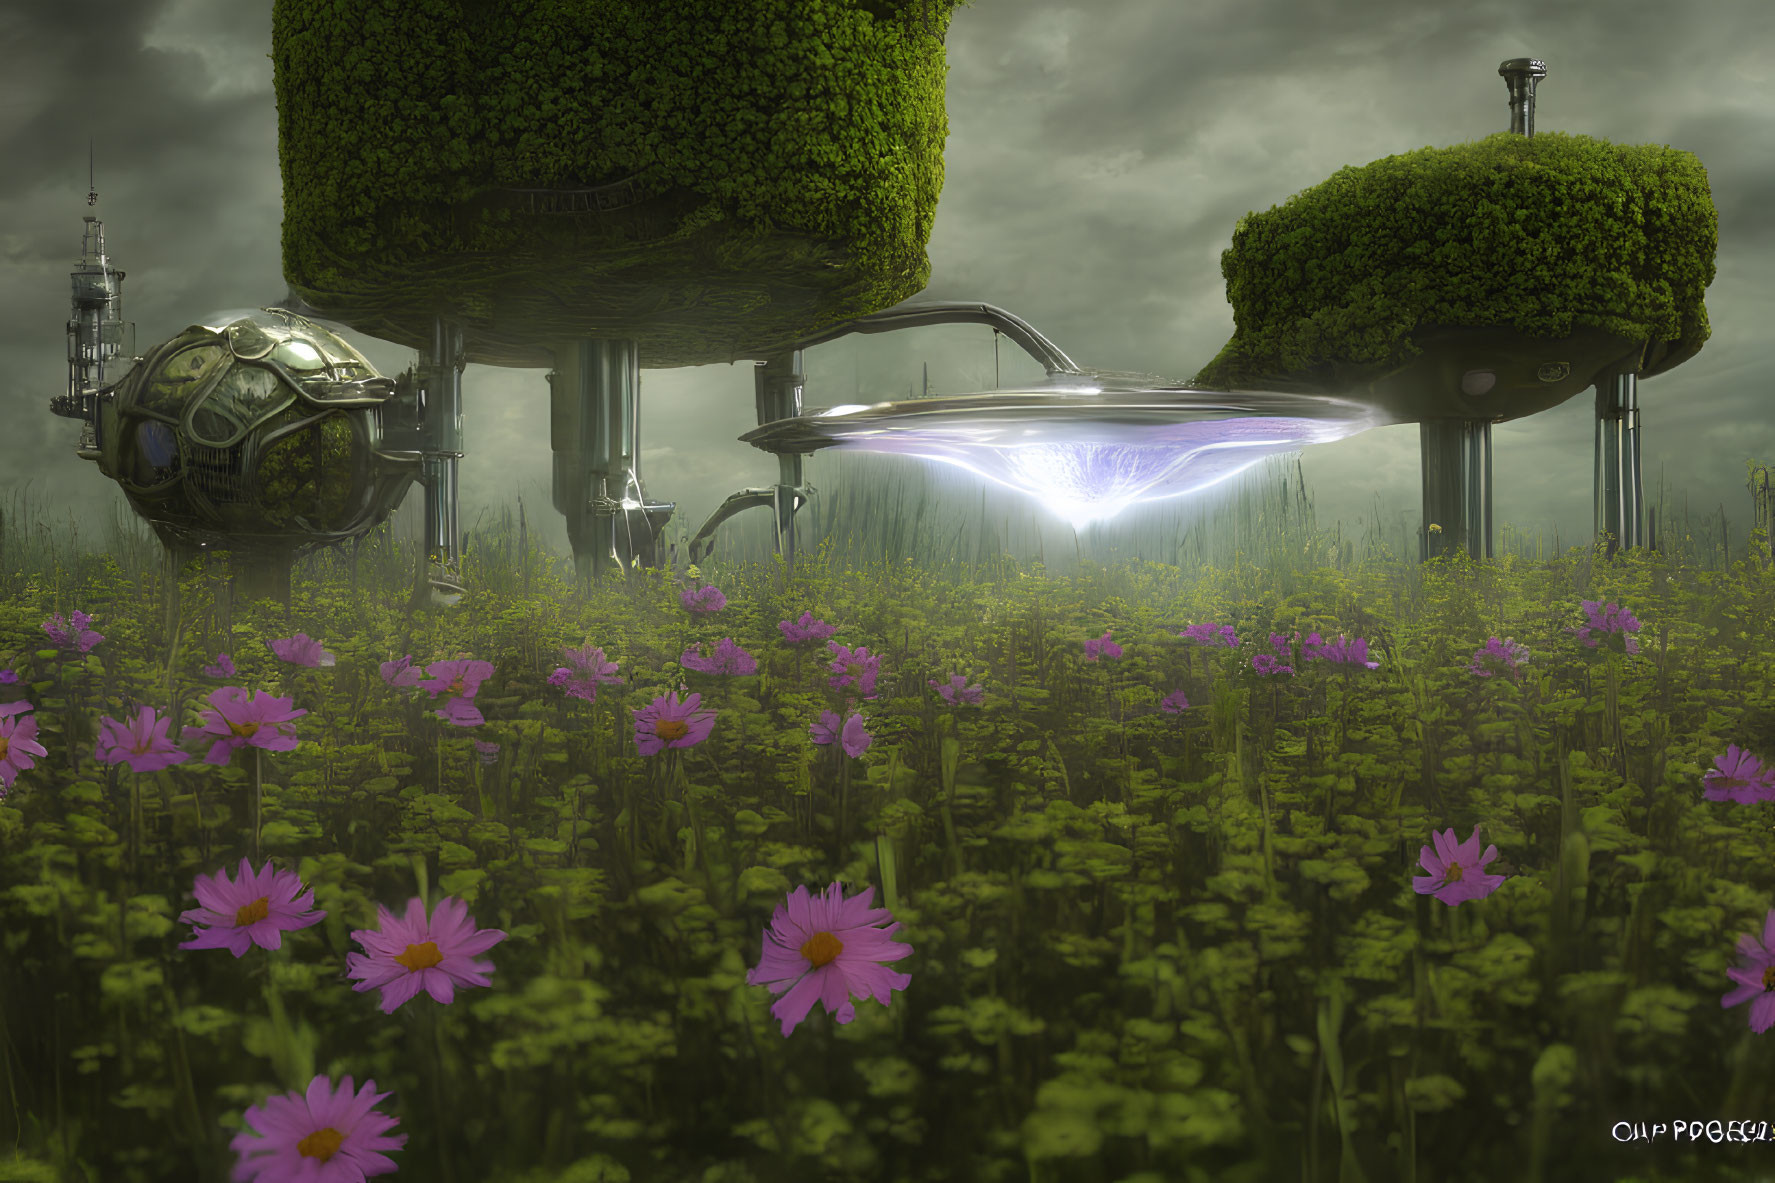 Futuristic floating structures over purple flower field with spaceship landing